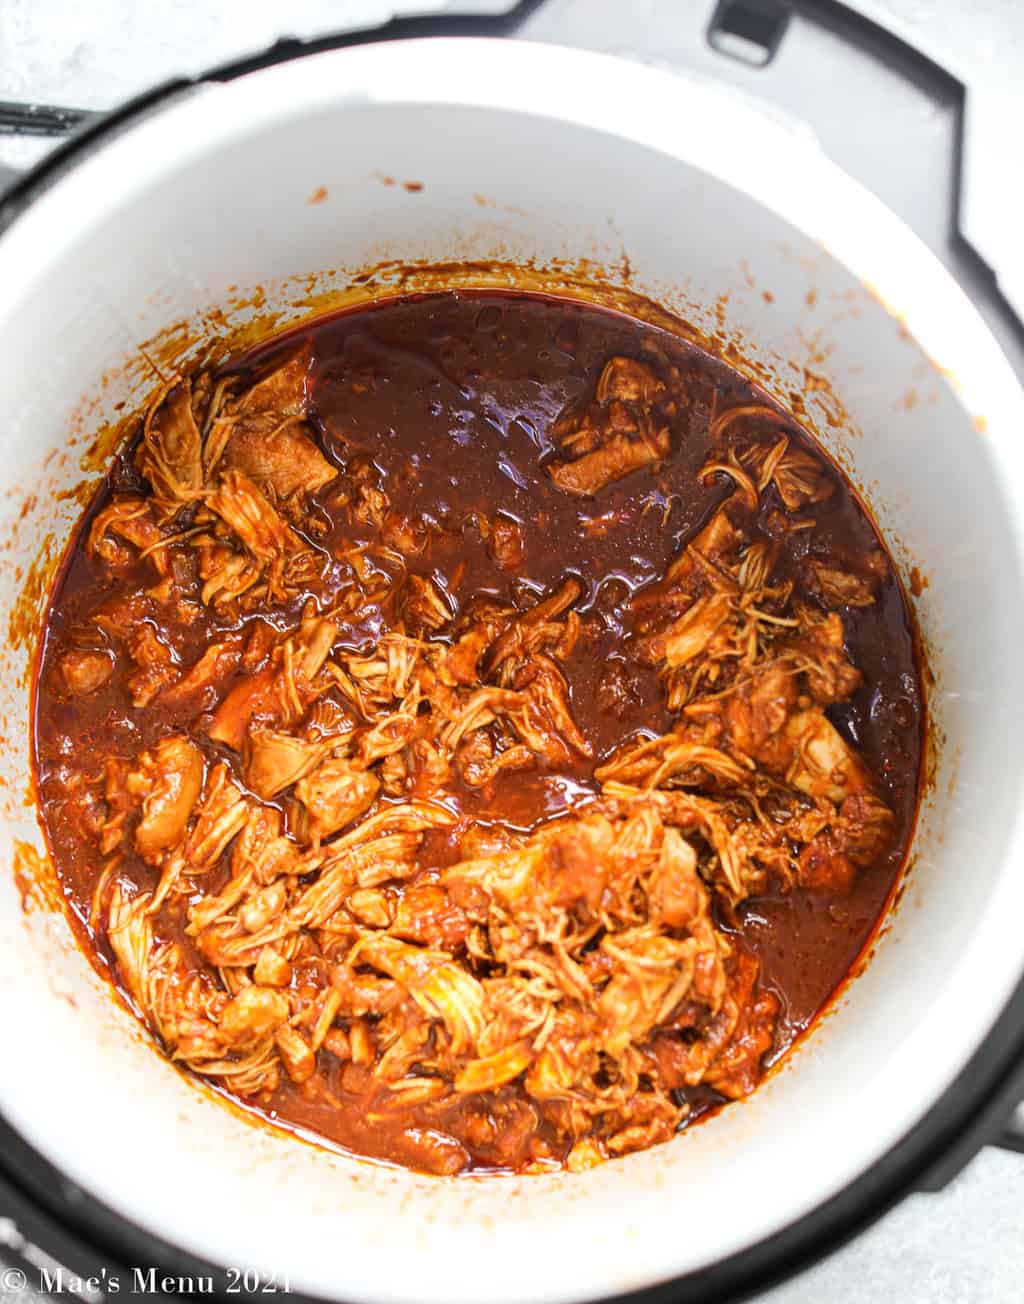 Shredded chicken in barbecue sauce in the instant pot bowl 